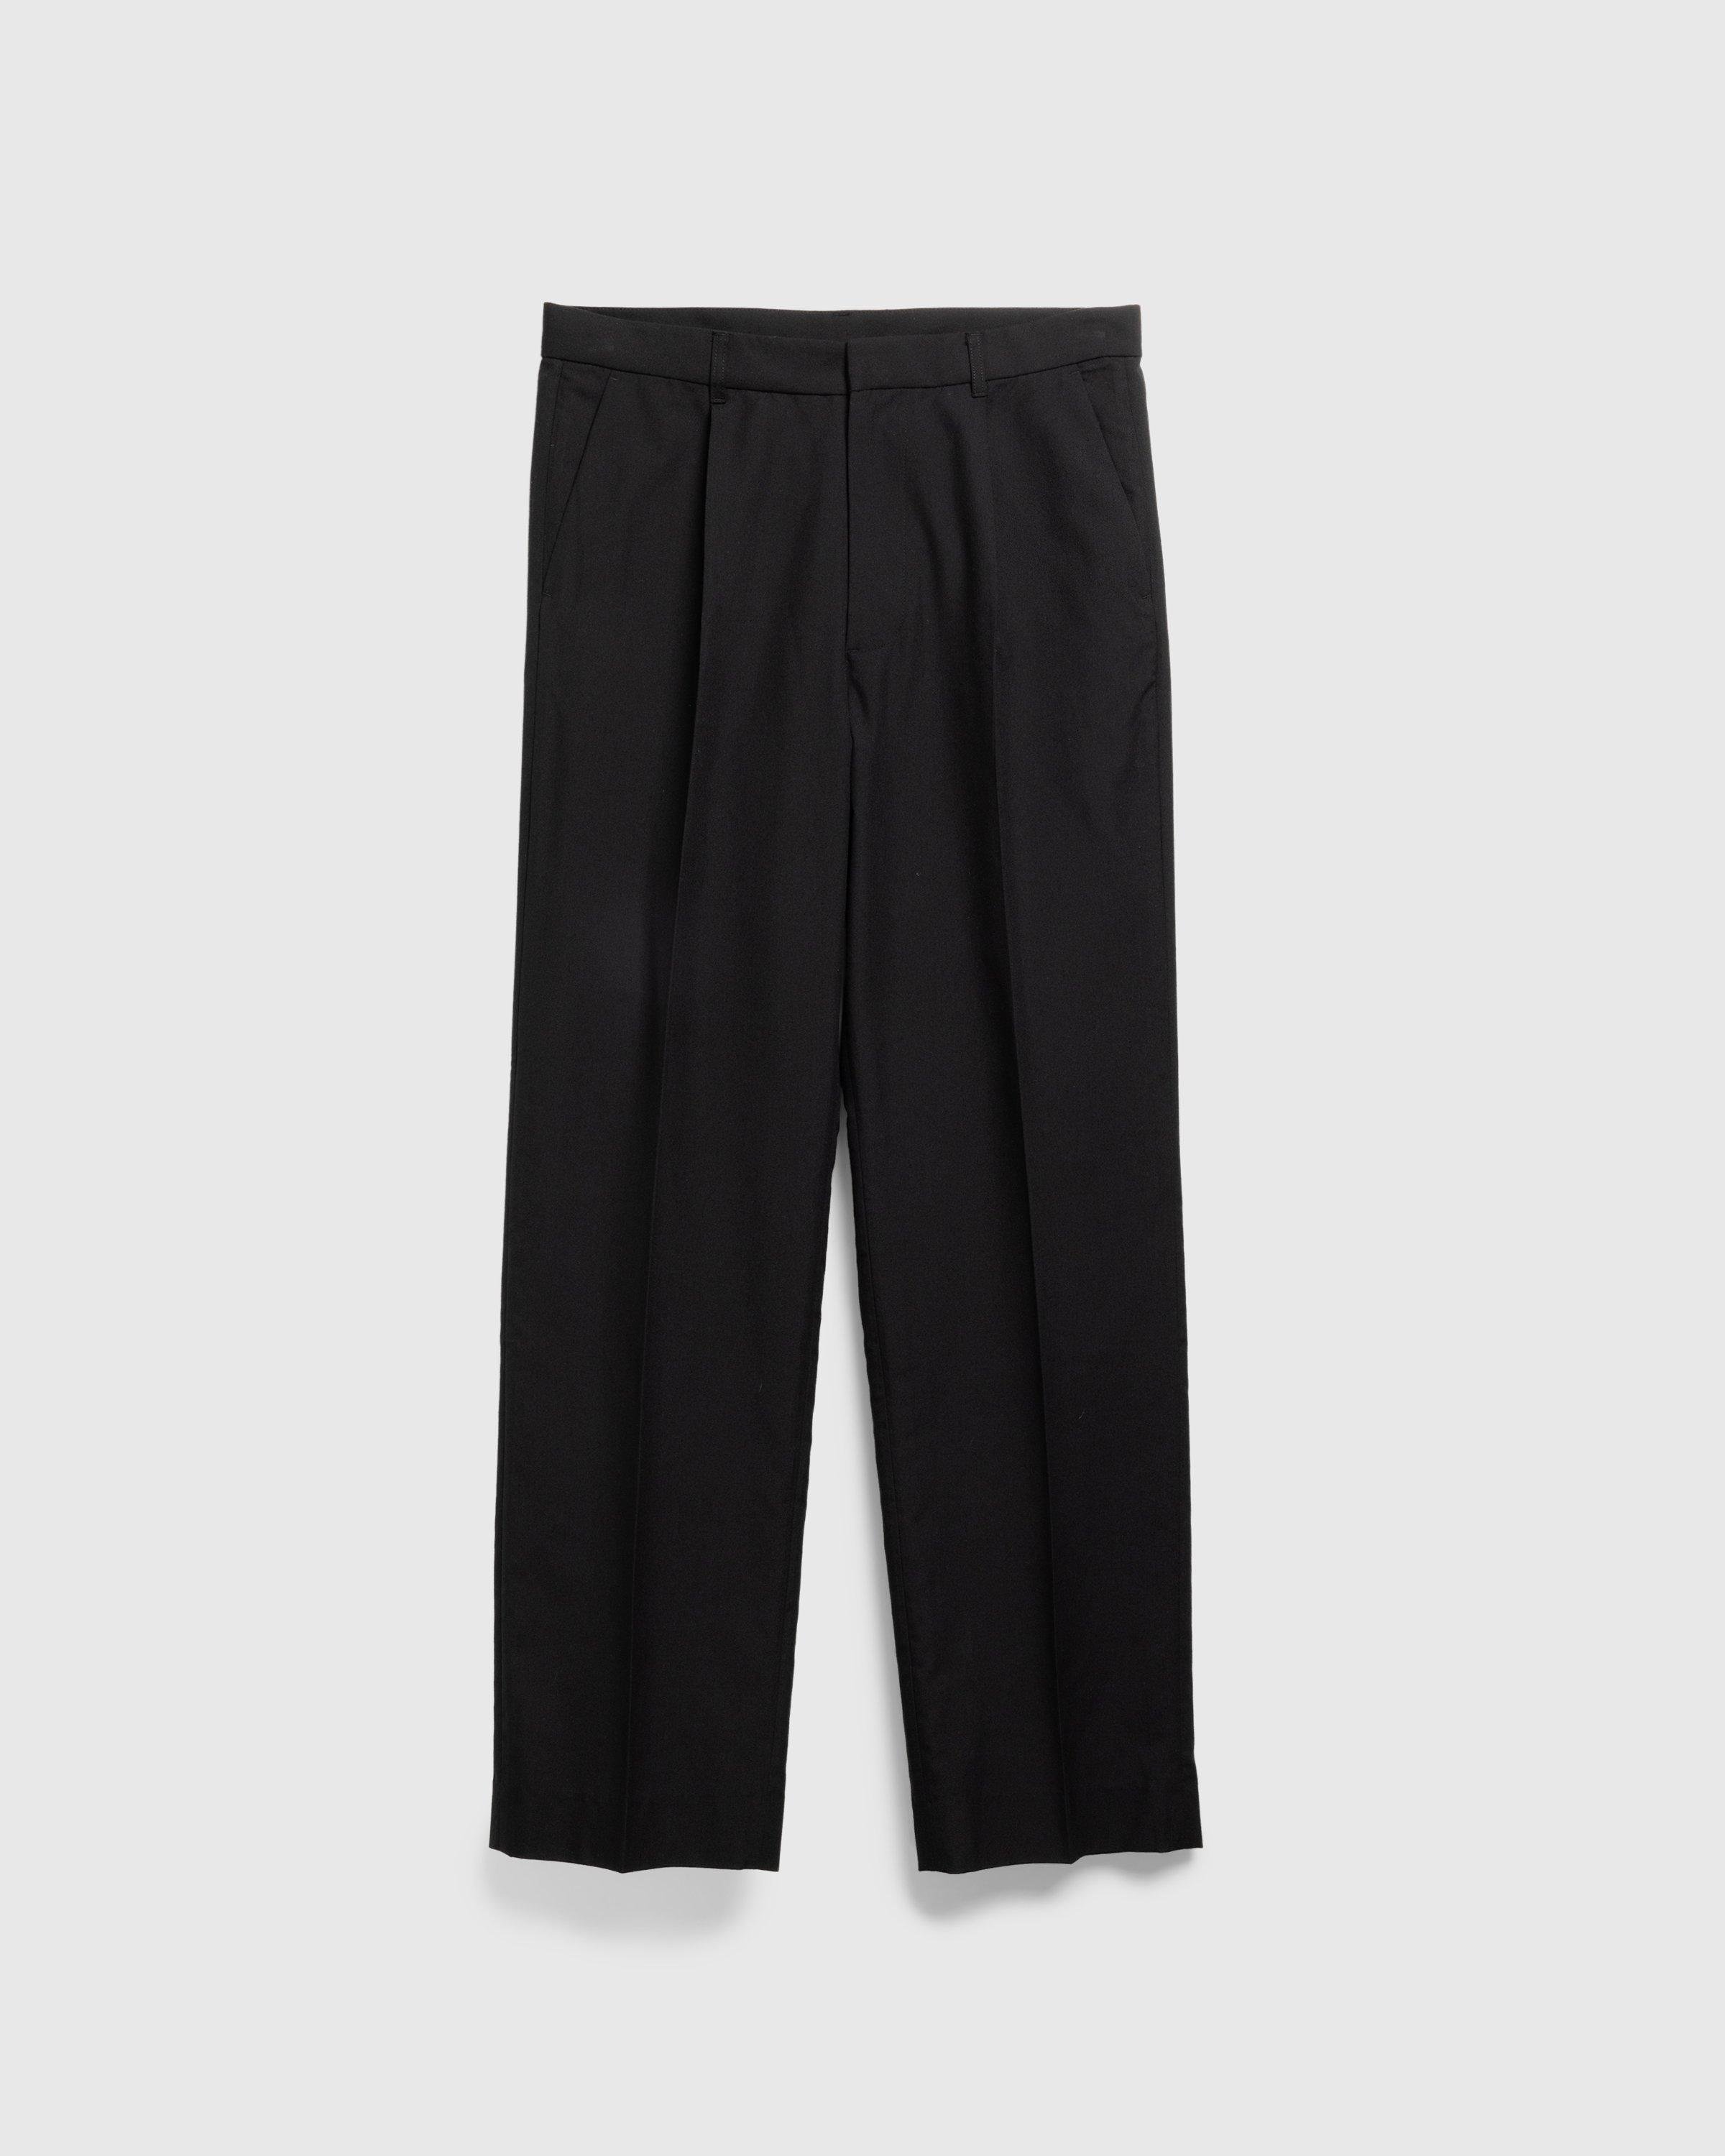 Highsnobiety HS05Tropical Suiting Pants Black by HIGHSNOBIETY